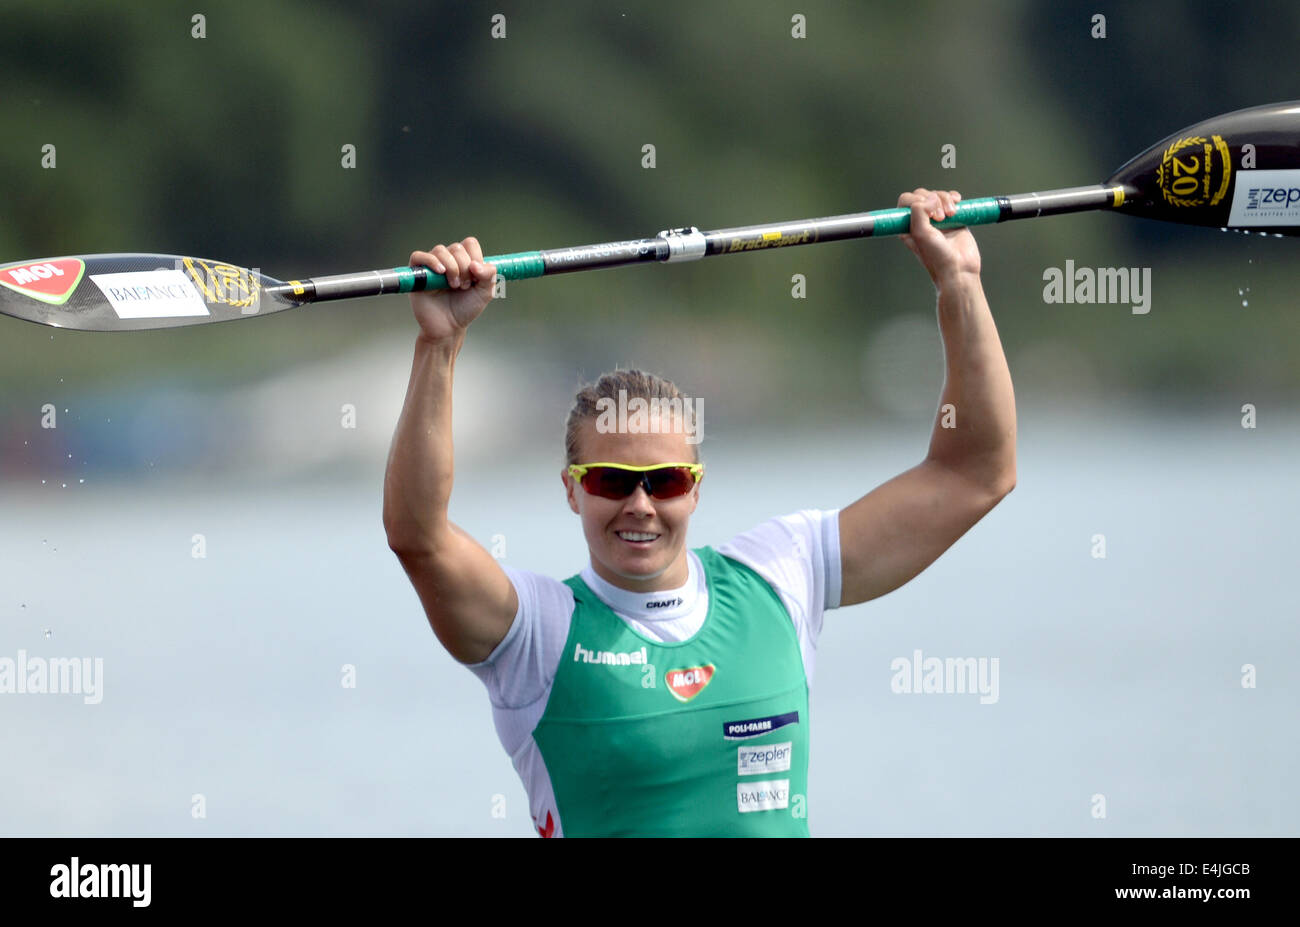 Brandenburg, Germany. 13th July, 2014. Hungarian Danuta Kozak cheers after her victory in the kayak singles class over 200 meters during the European Canoeing Championships on Lake Beetzsee in Brandenburg, Germany, 13 July 2014. The European Canoeing Championships take place from 10 to 13 July 2014. Photo: Ralf Hirschberger/dpa/Alamy Live News Stock Photo